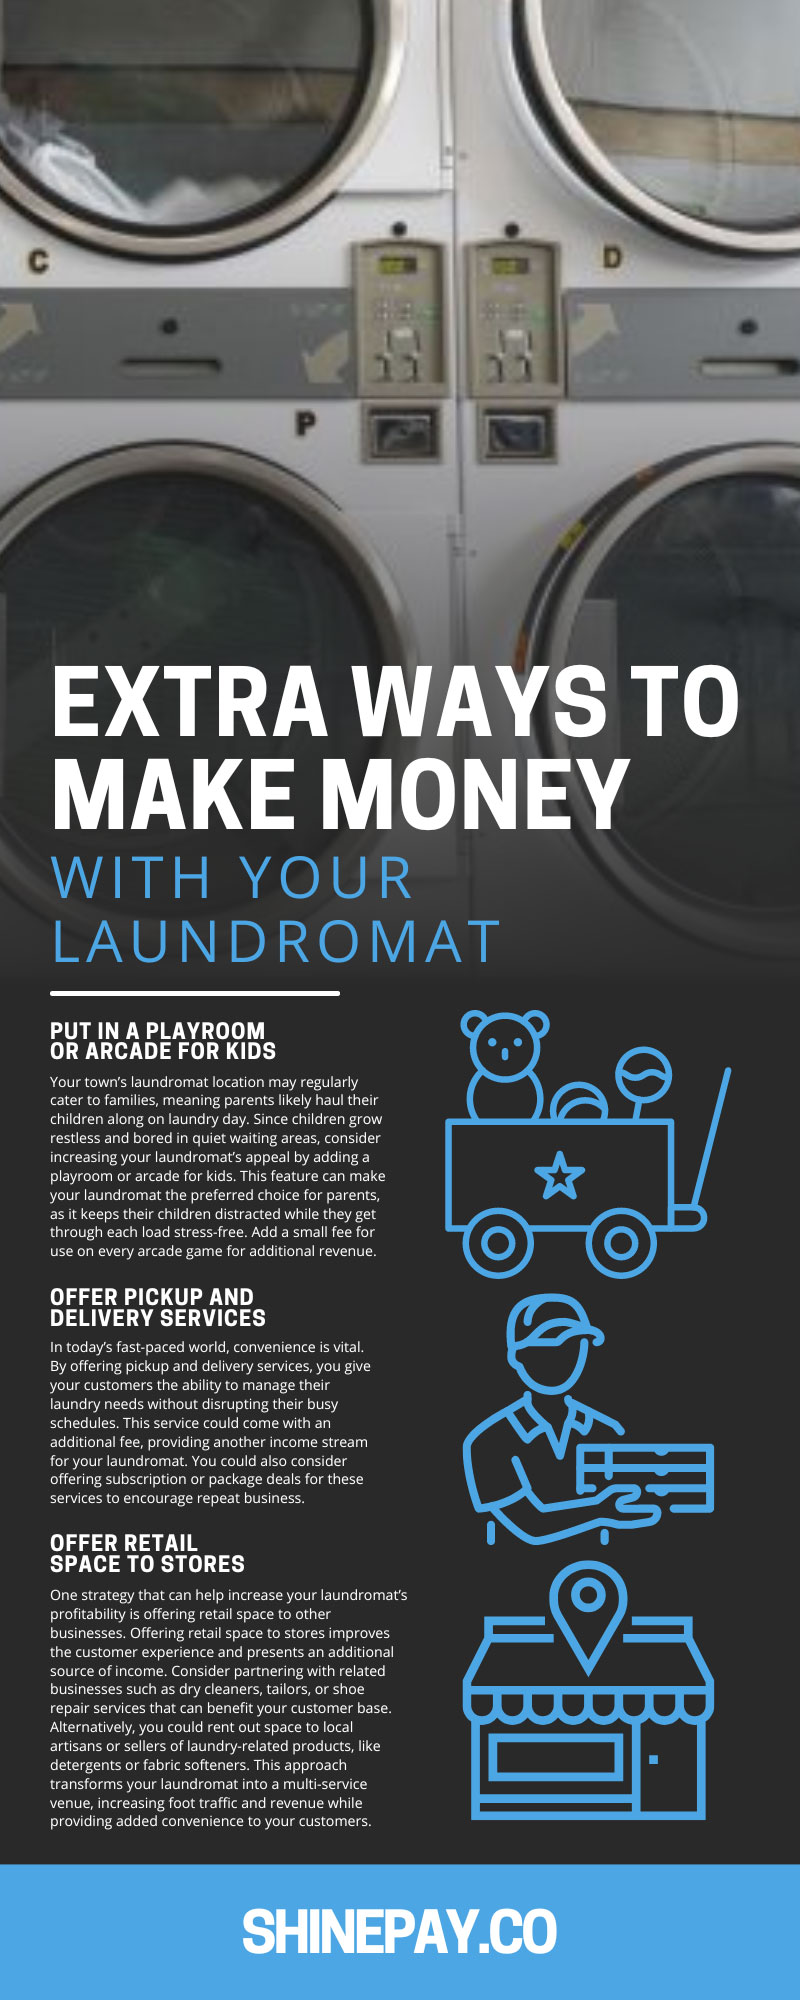 Extra Ways To Make Money With Your Laundromat
